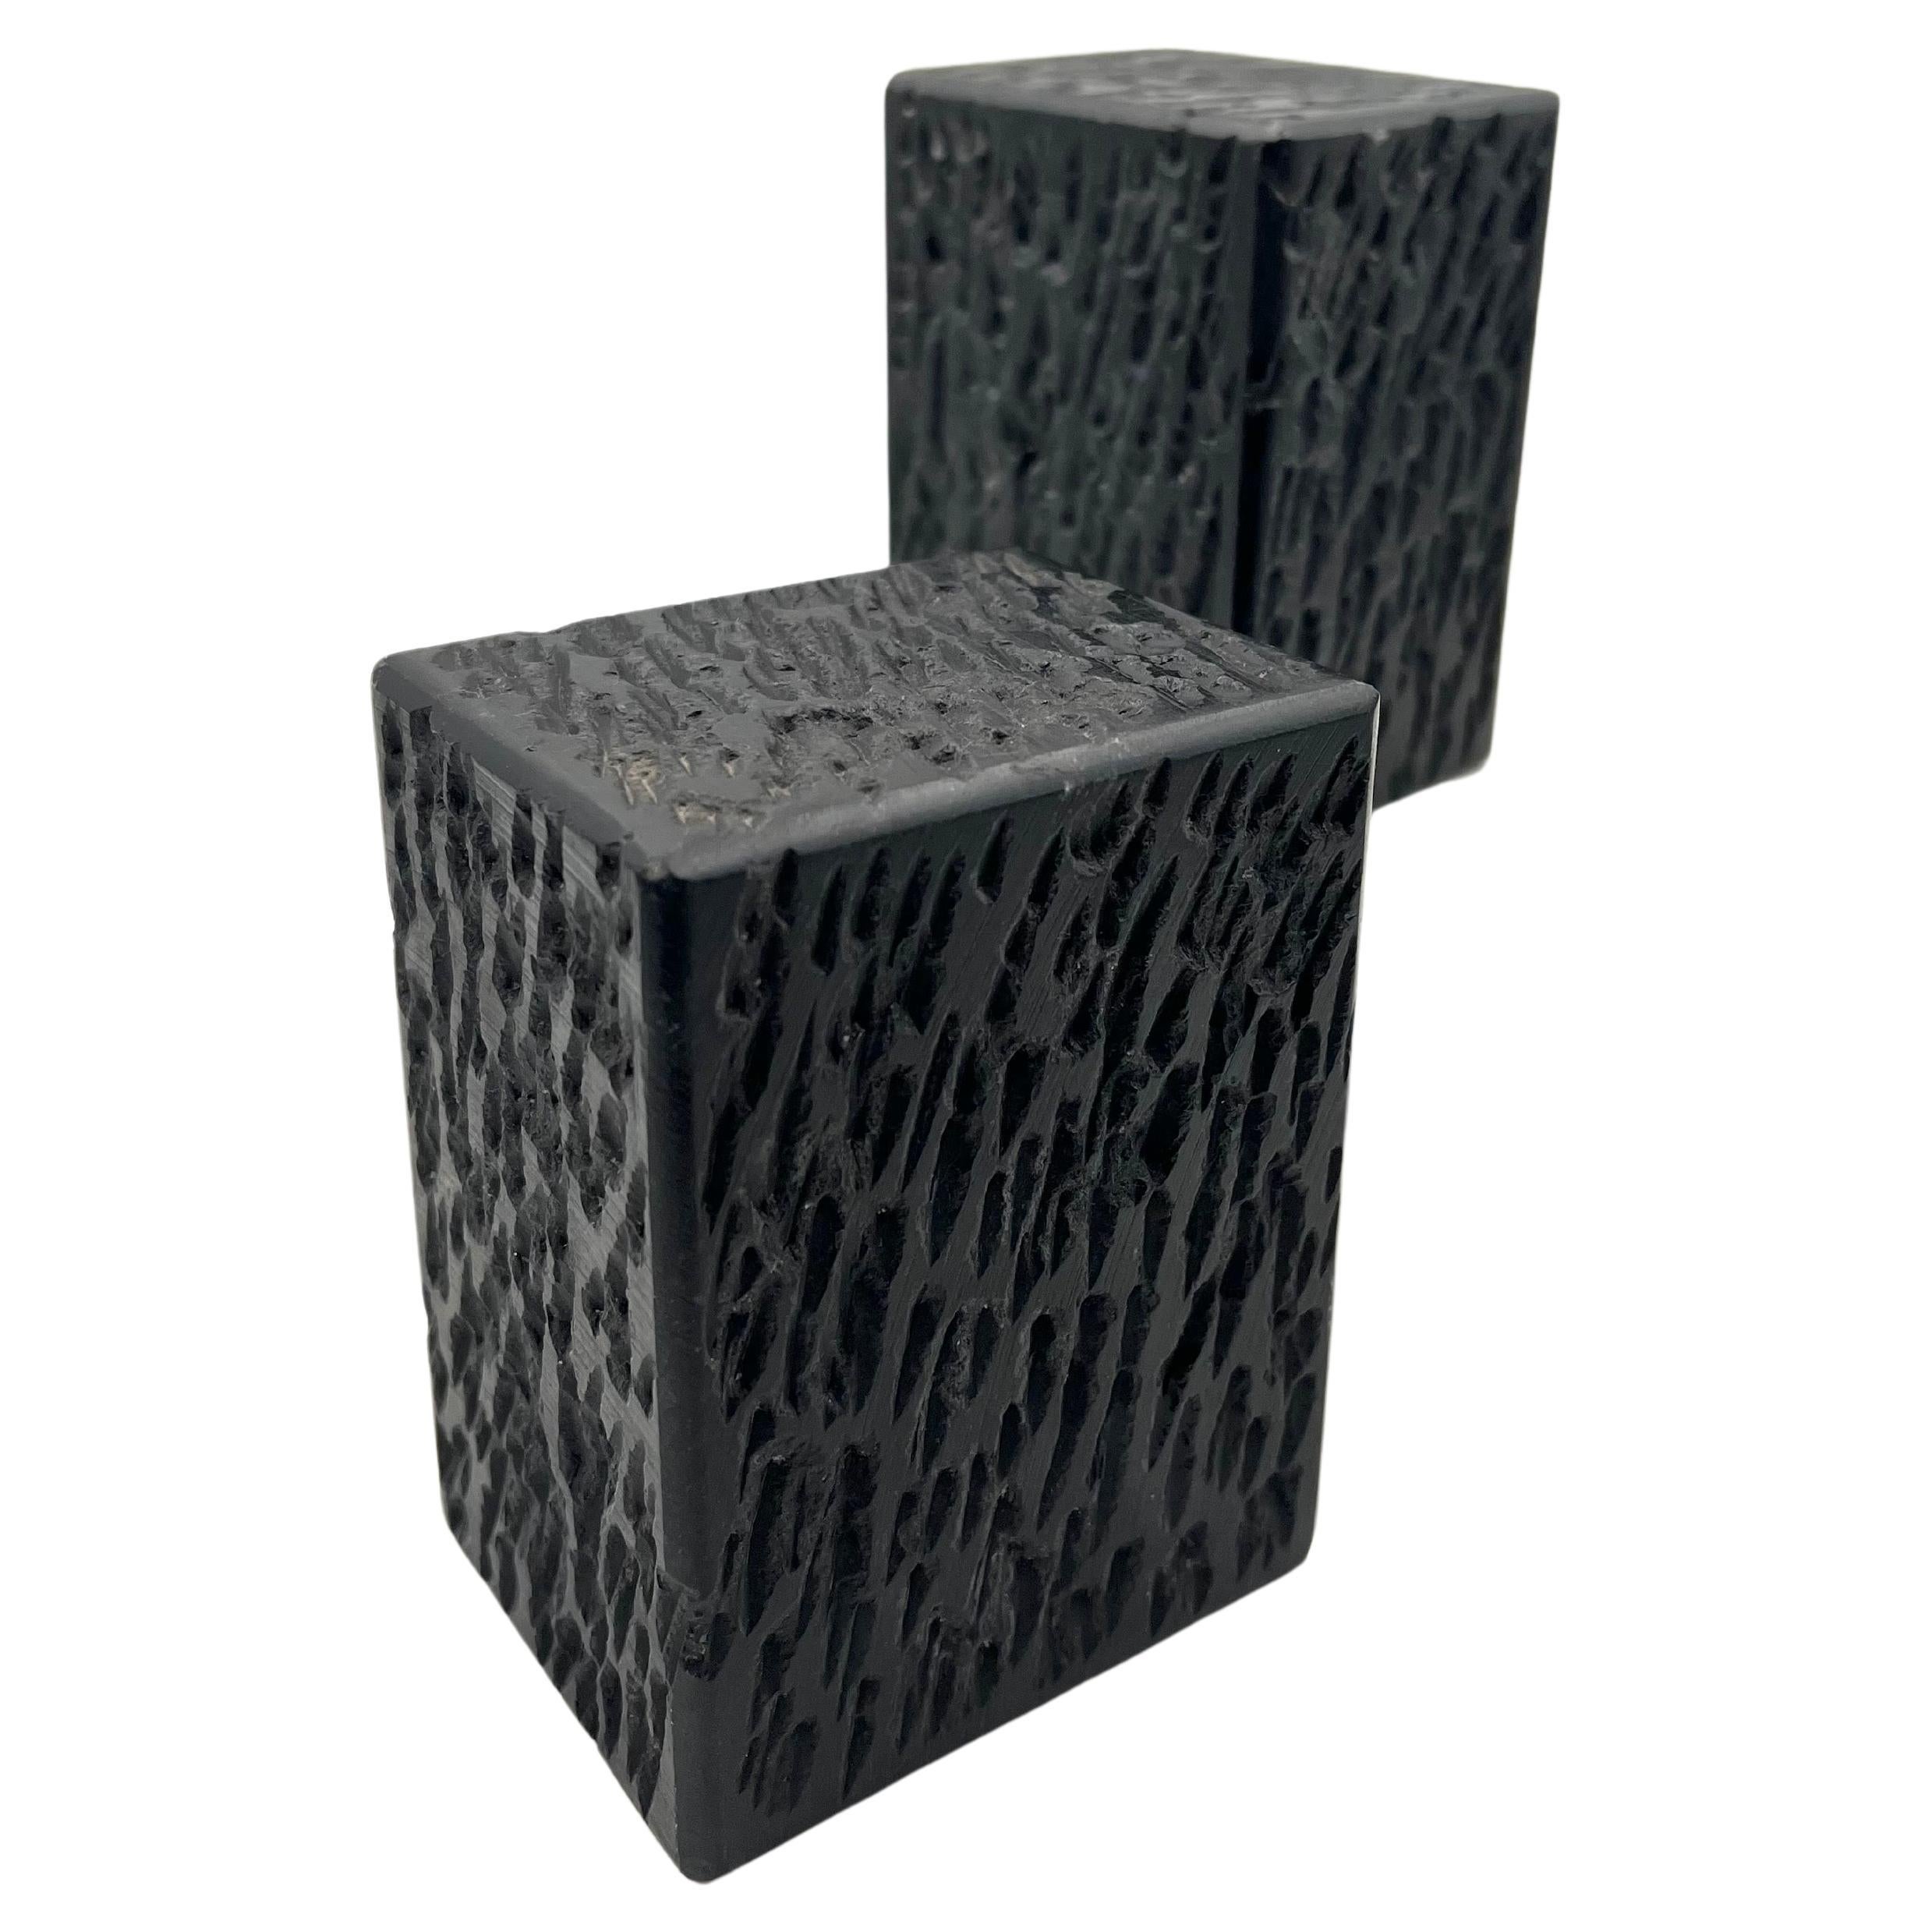 Pair of Solid Marble Modernist Bookends Blocks with Textured Finish For Sale